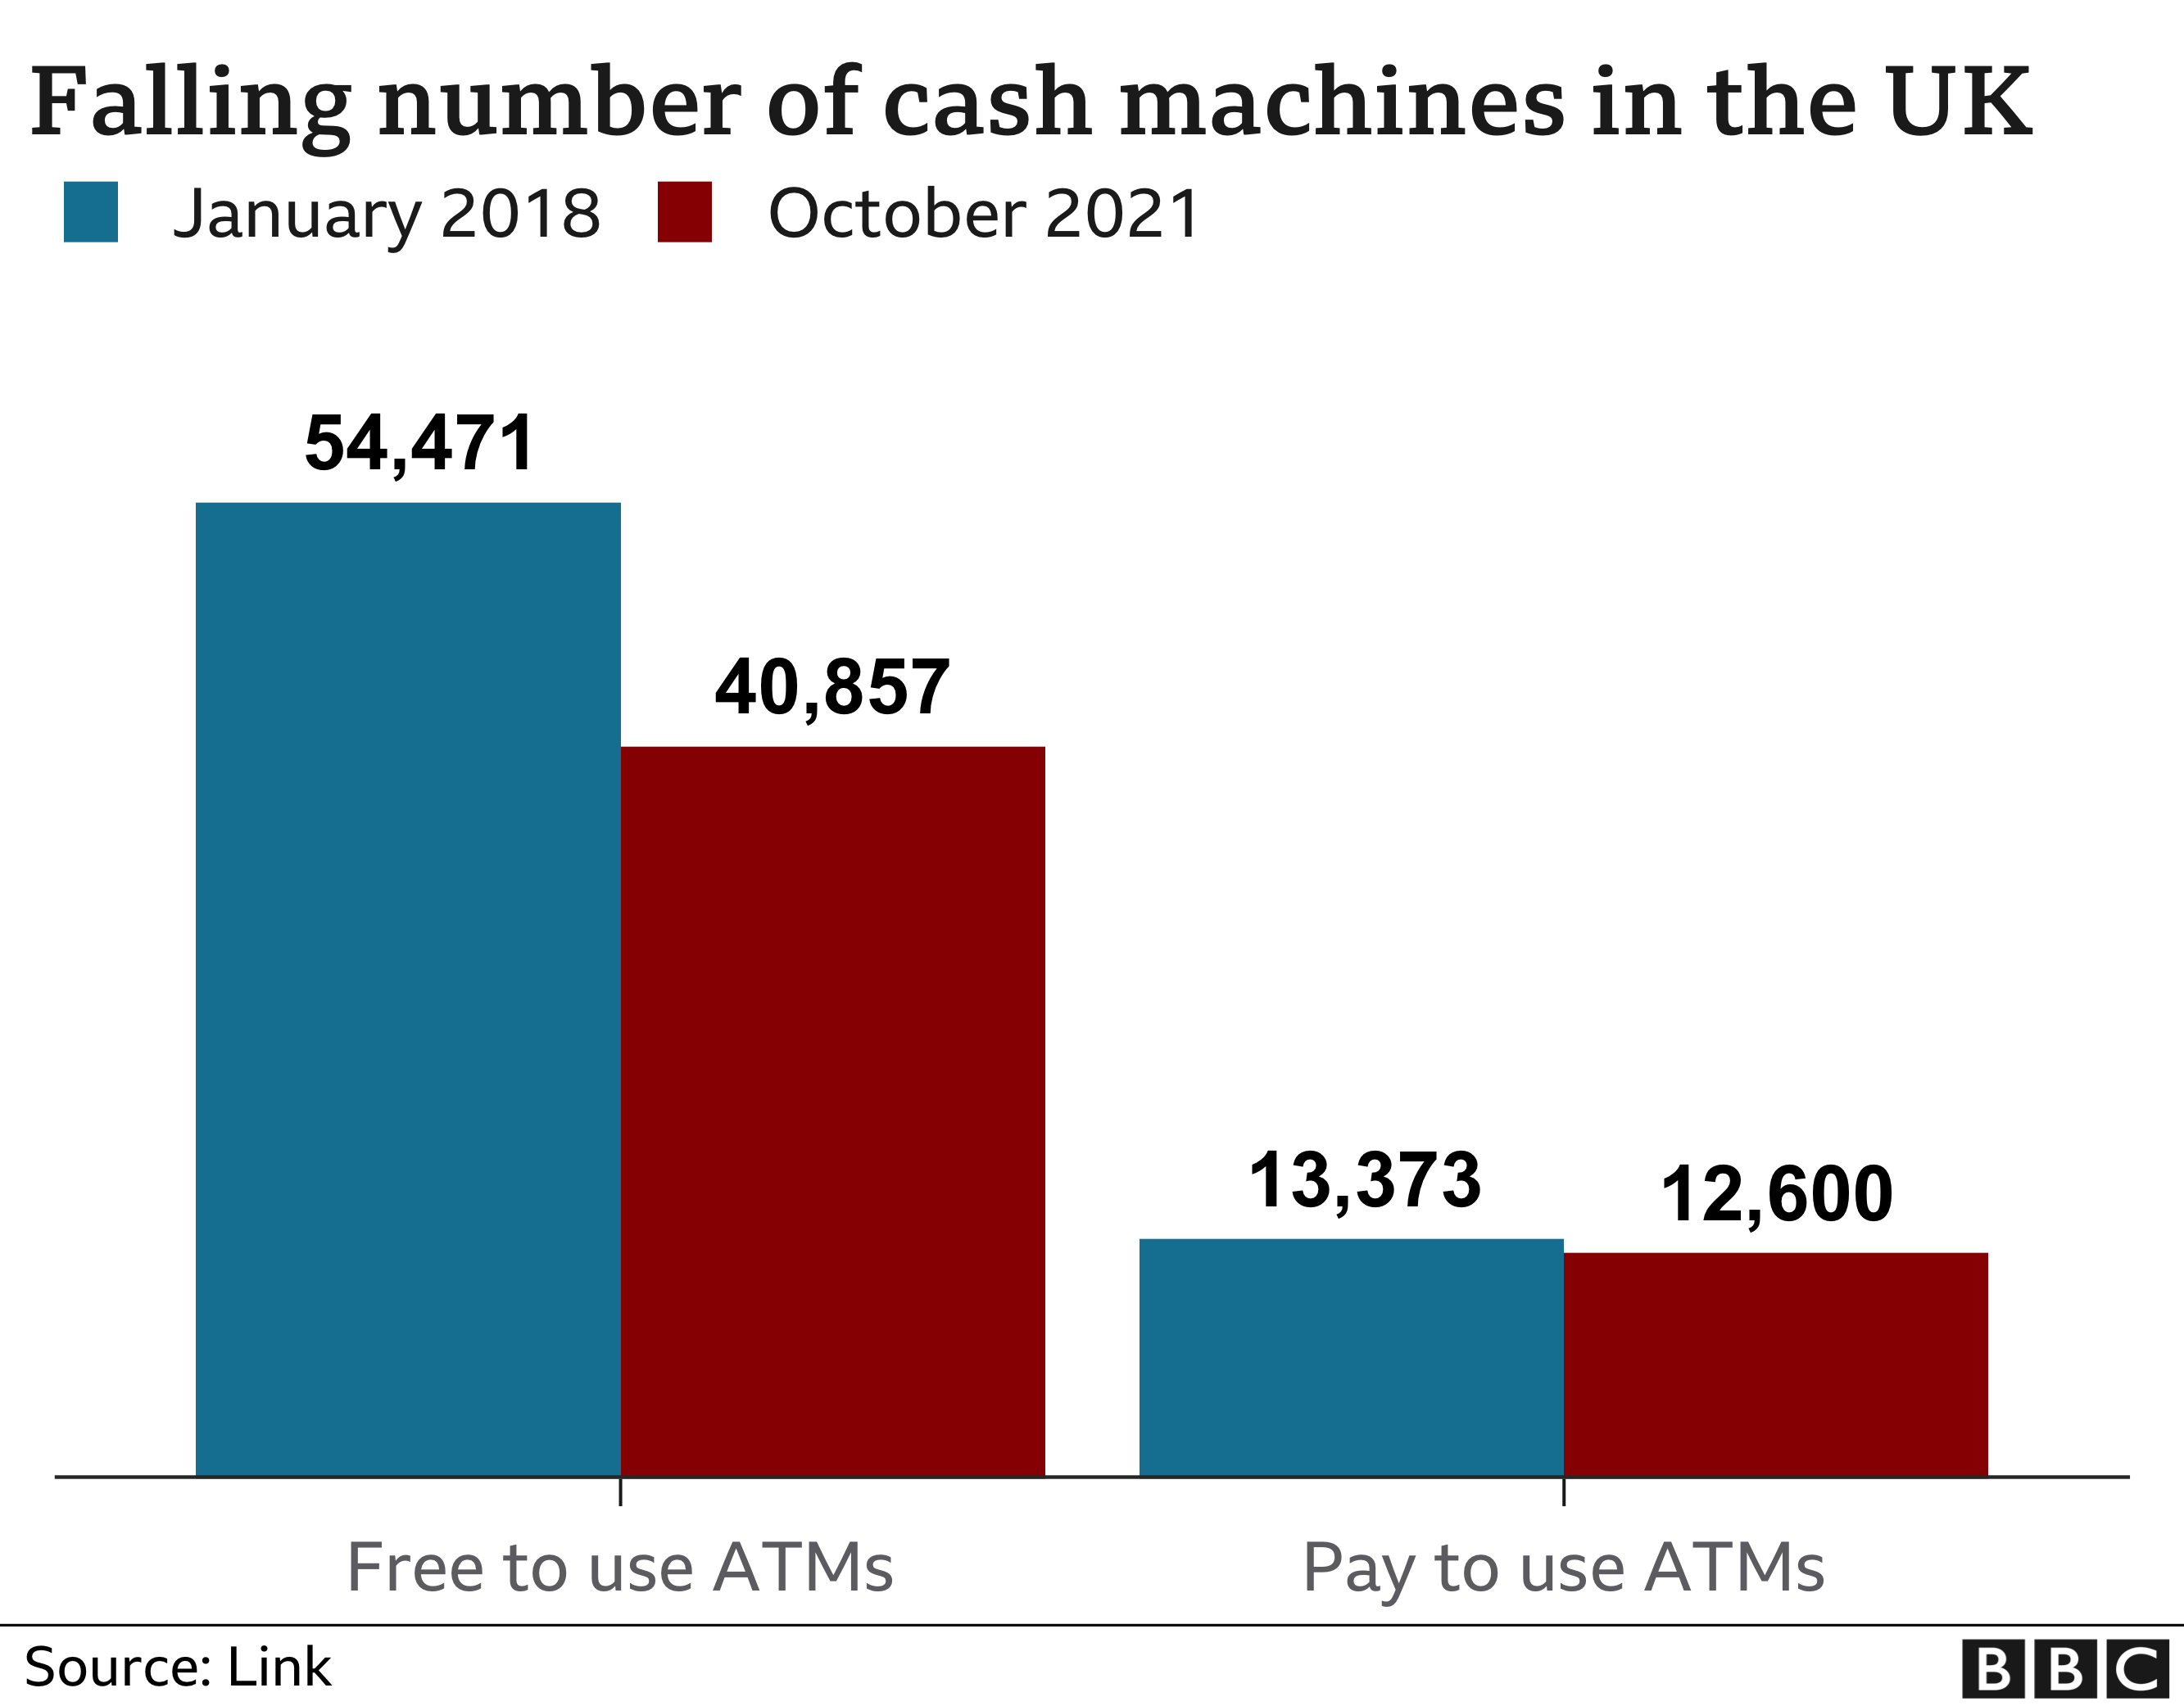 Chart showing the falling number of cash machines in the UK